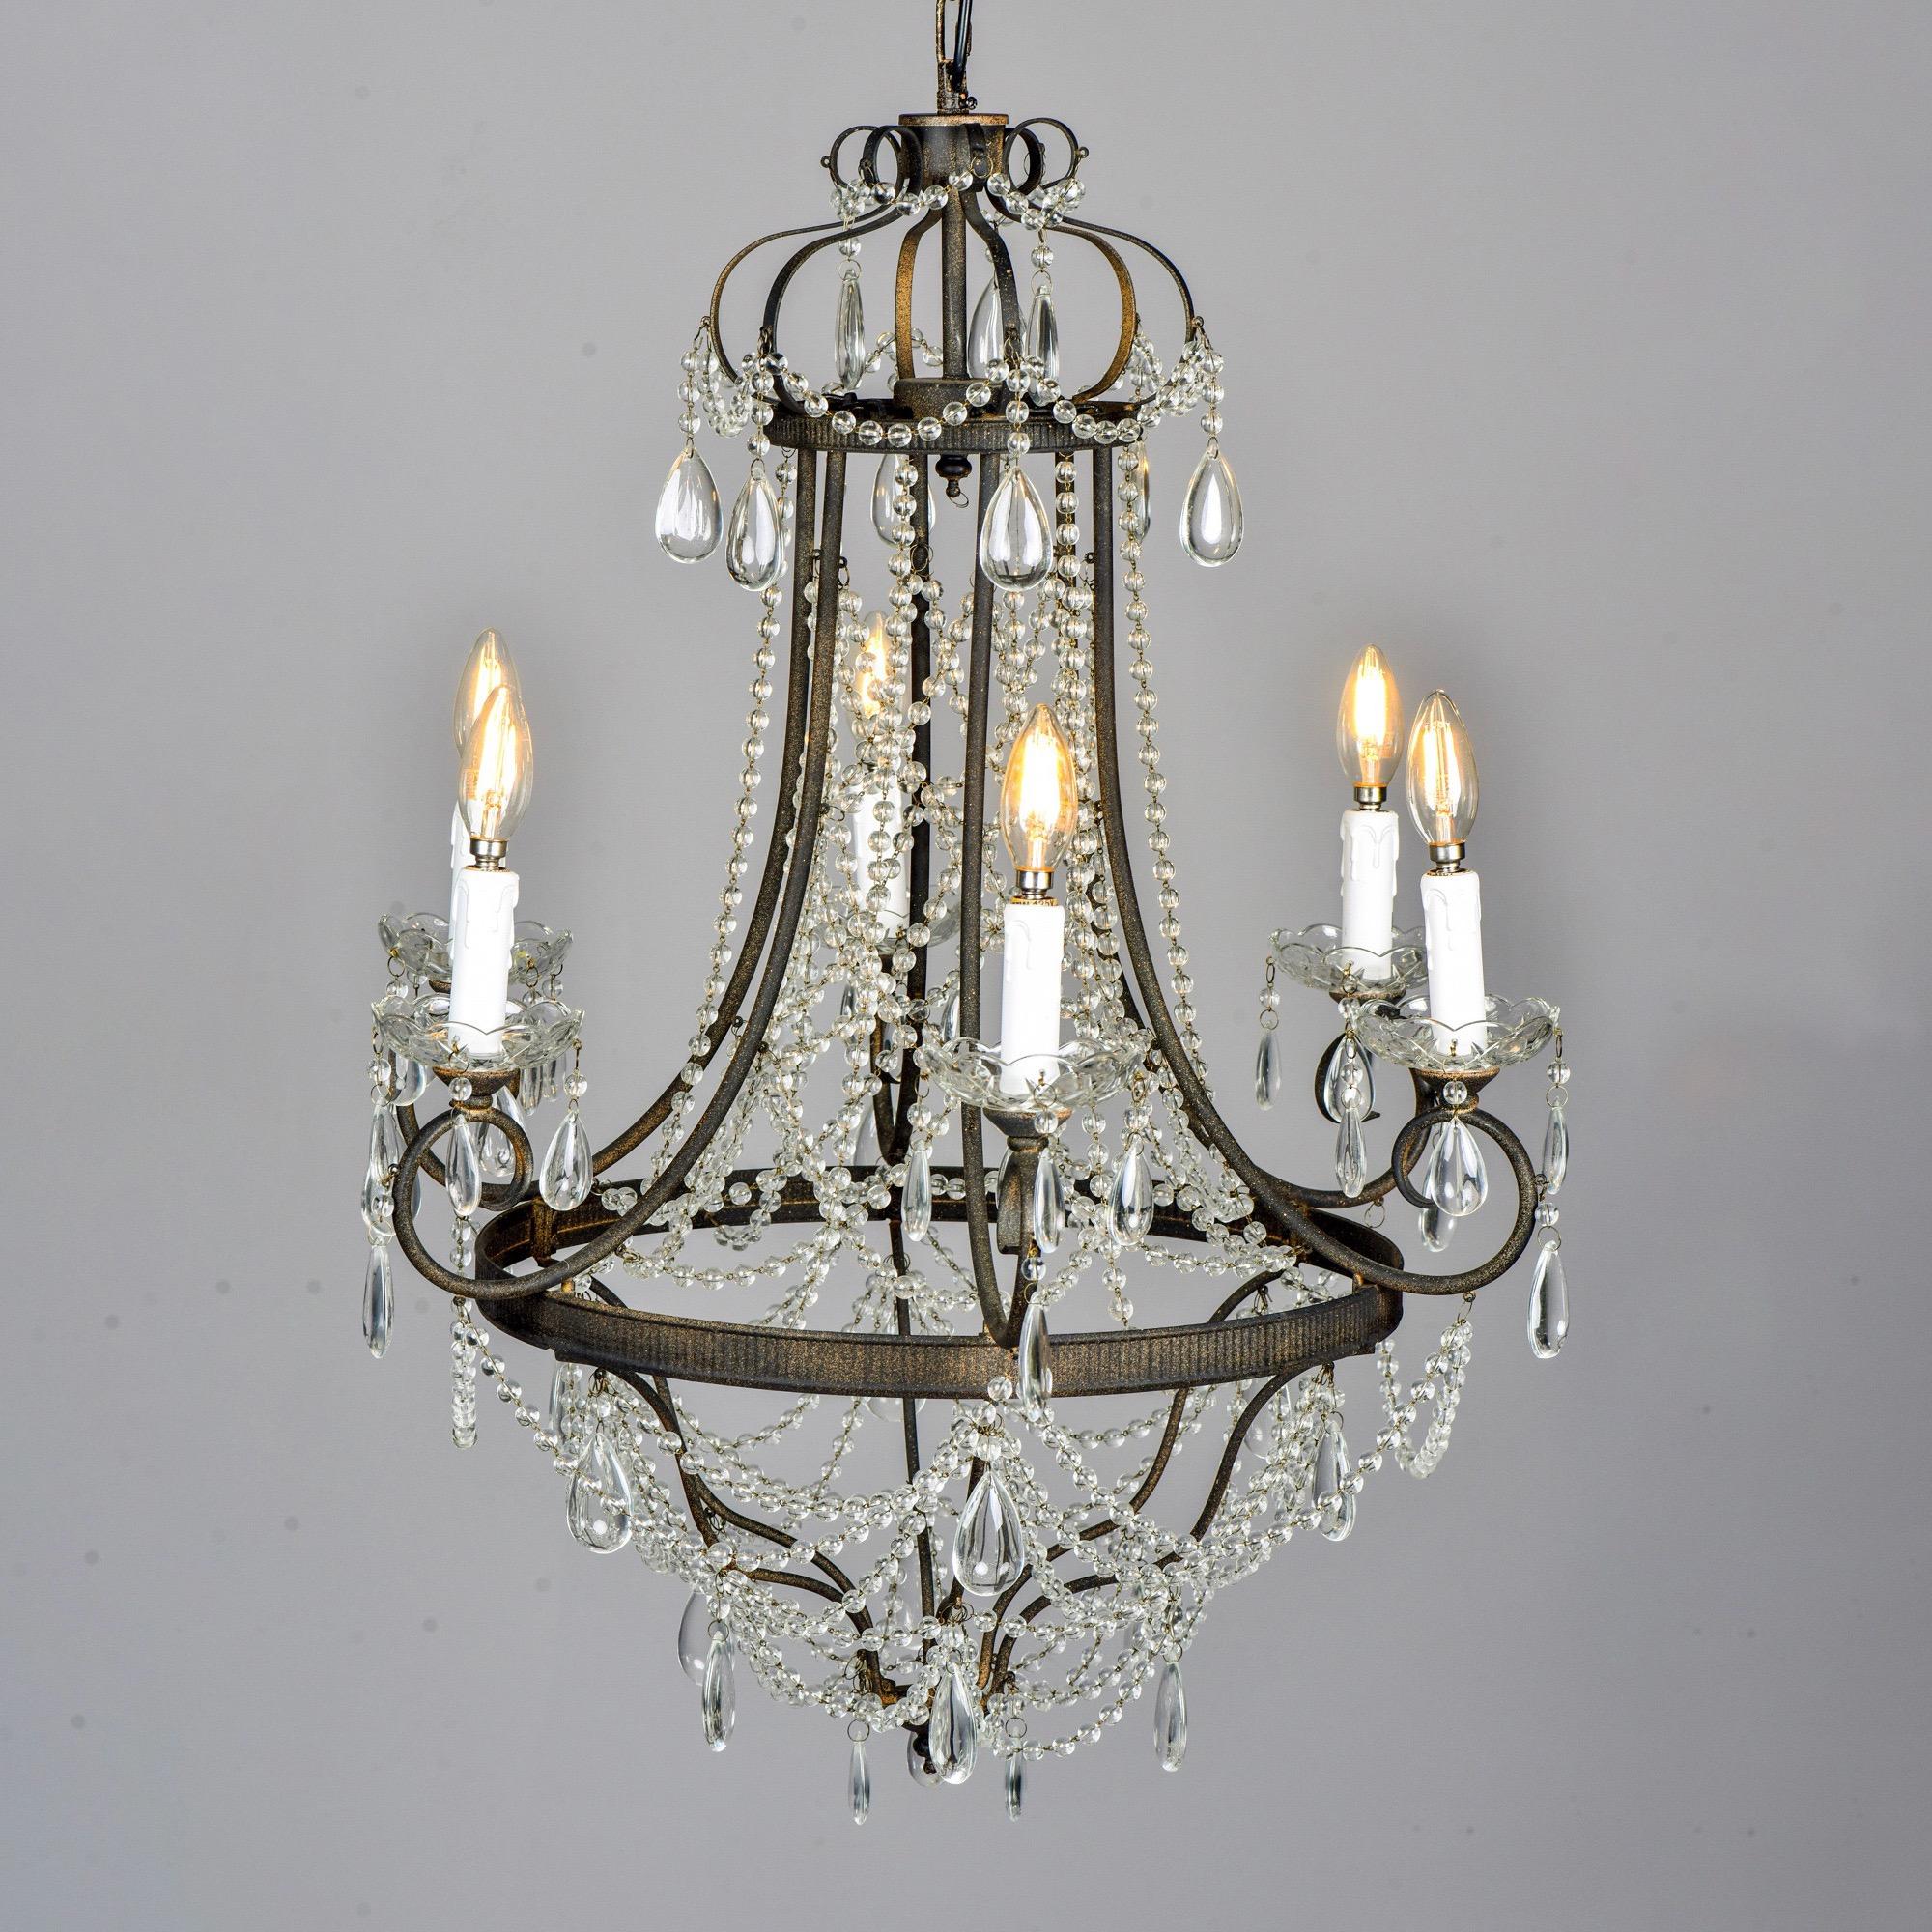 Dark iron framed chandelier with six candle arms and round crystal beading. Found in England. Unknown maker. New wiring for US electrical standards.